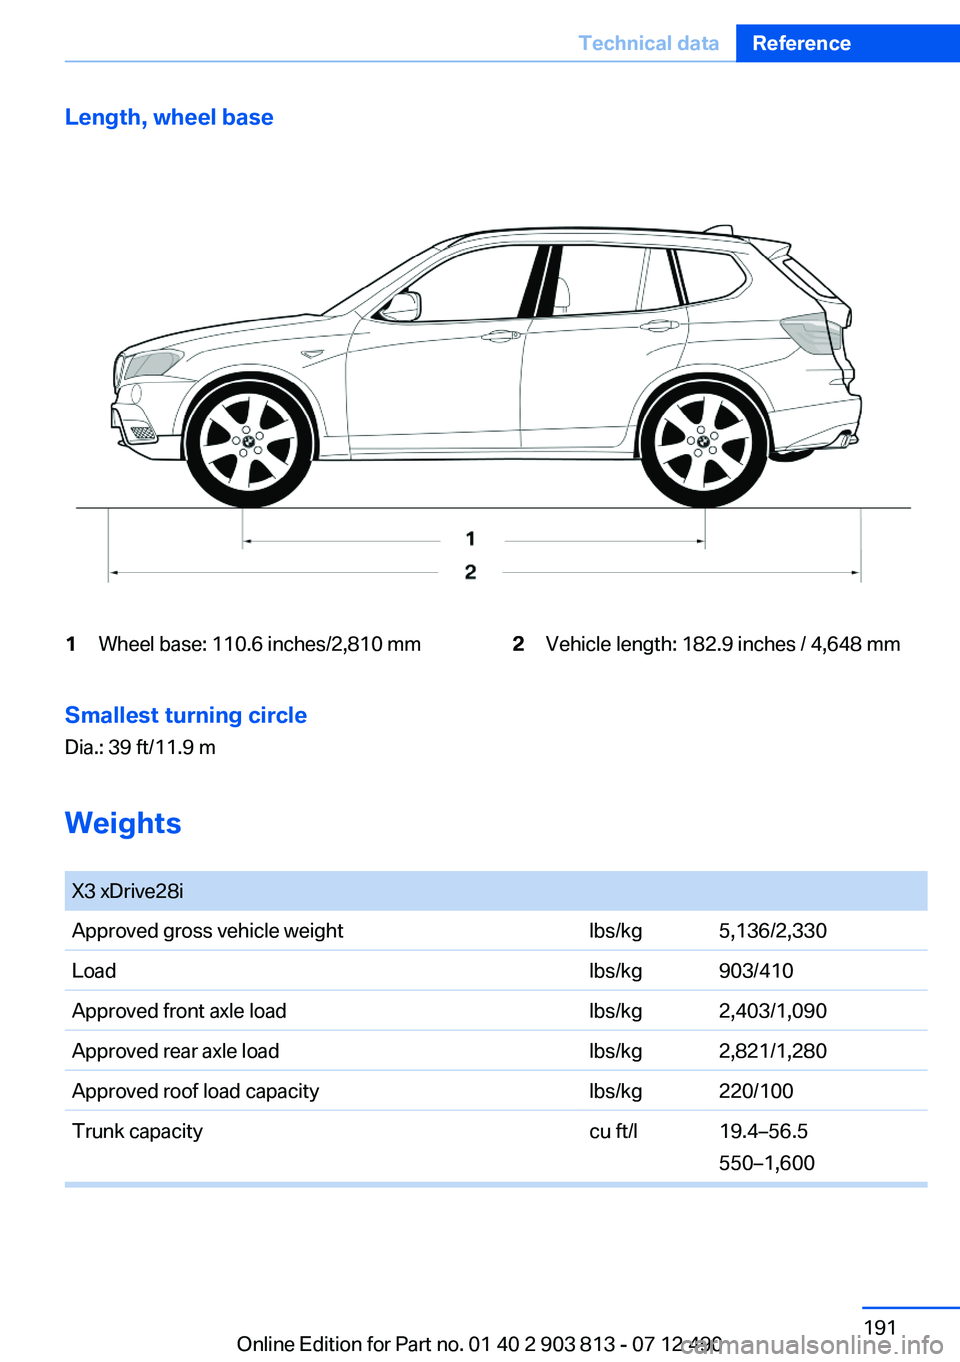 BMW X3 XDRIVE 35I 2013  Owners Manual Length, wheel base1Wheel base: 110.6 inches/2,810 mm2Vehicle length: 182.9 inches / 4,648 mmSmallest turning circle
Dia.: 39 ft/11.9 m
Weights
 
X3 xDrive28iApproved gross vehicle weightlbs/kg5,136/2,